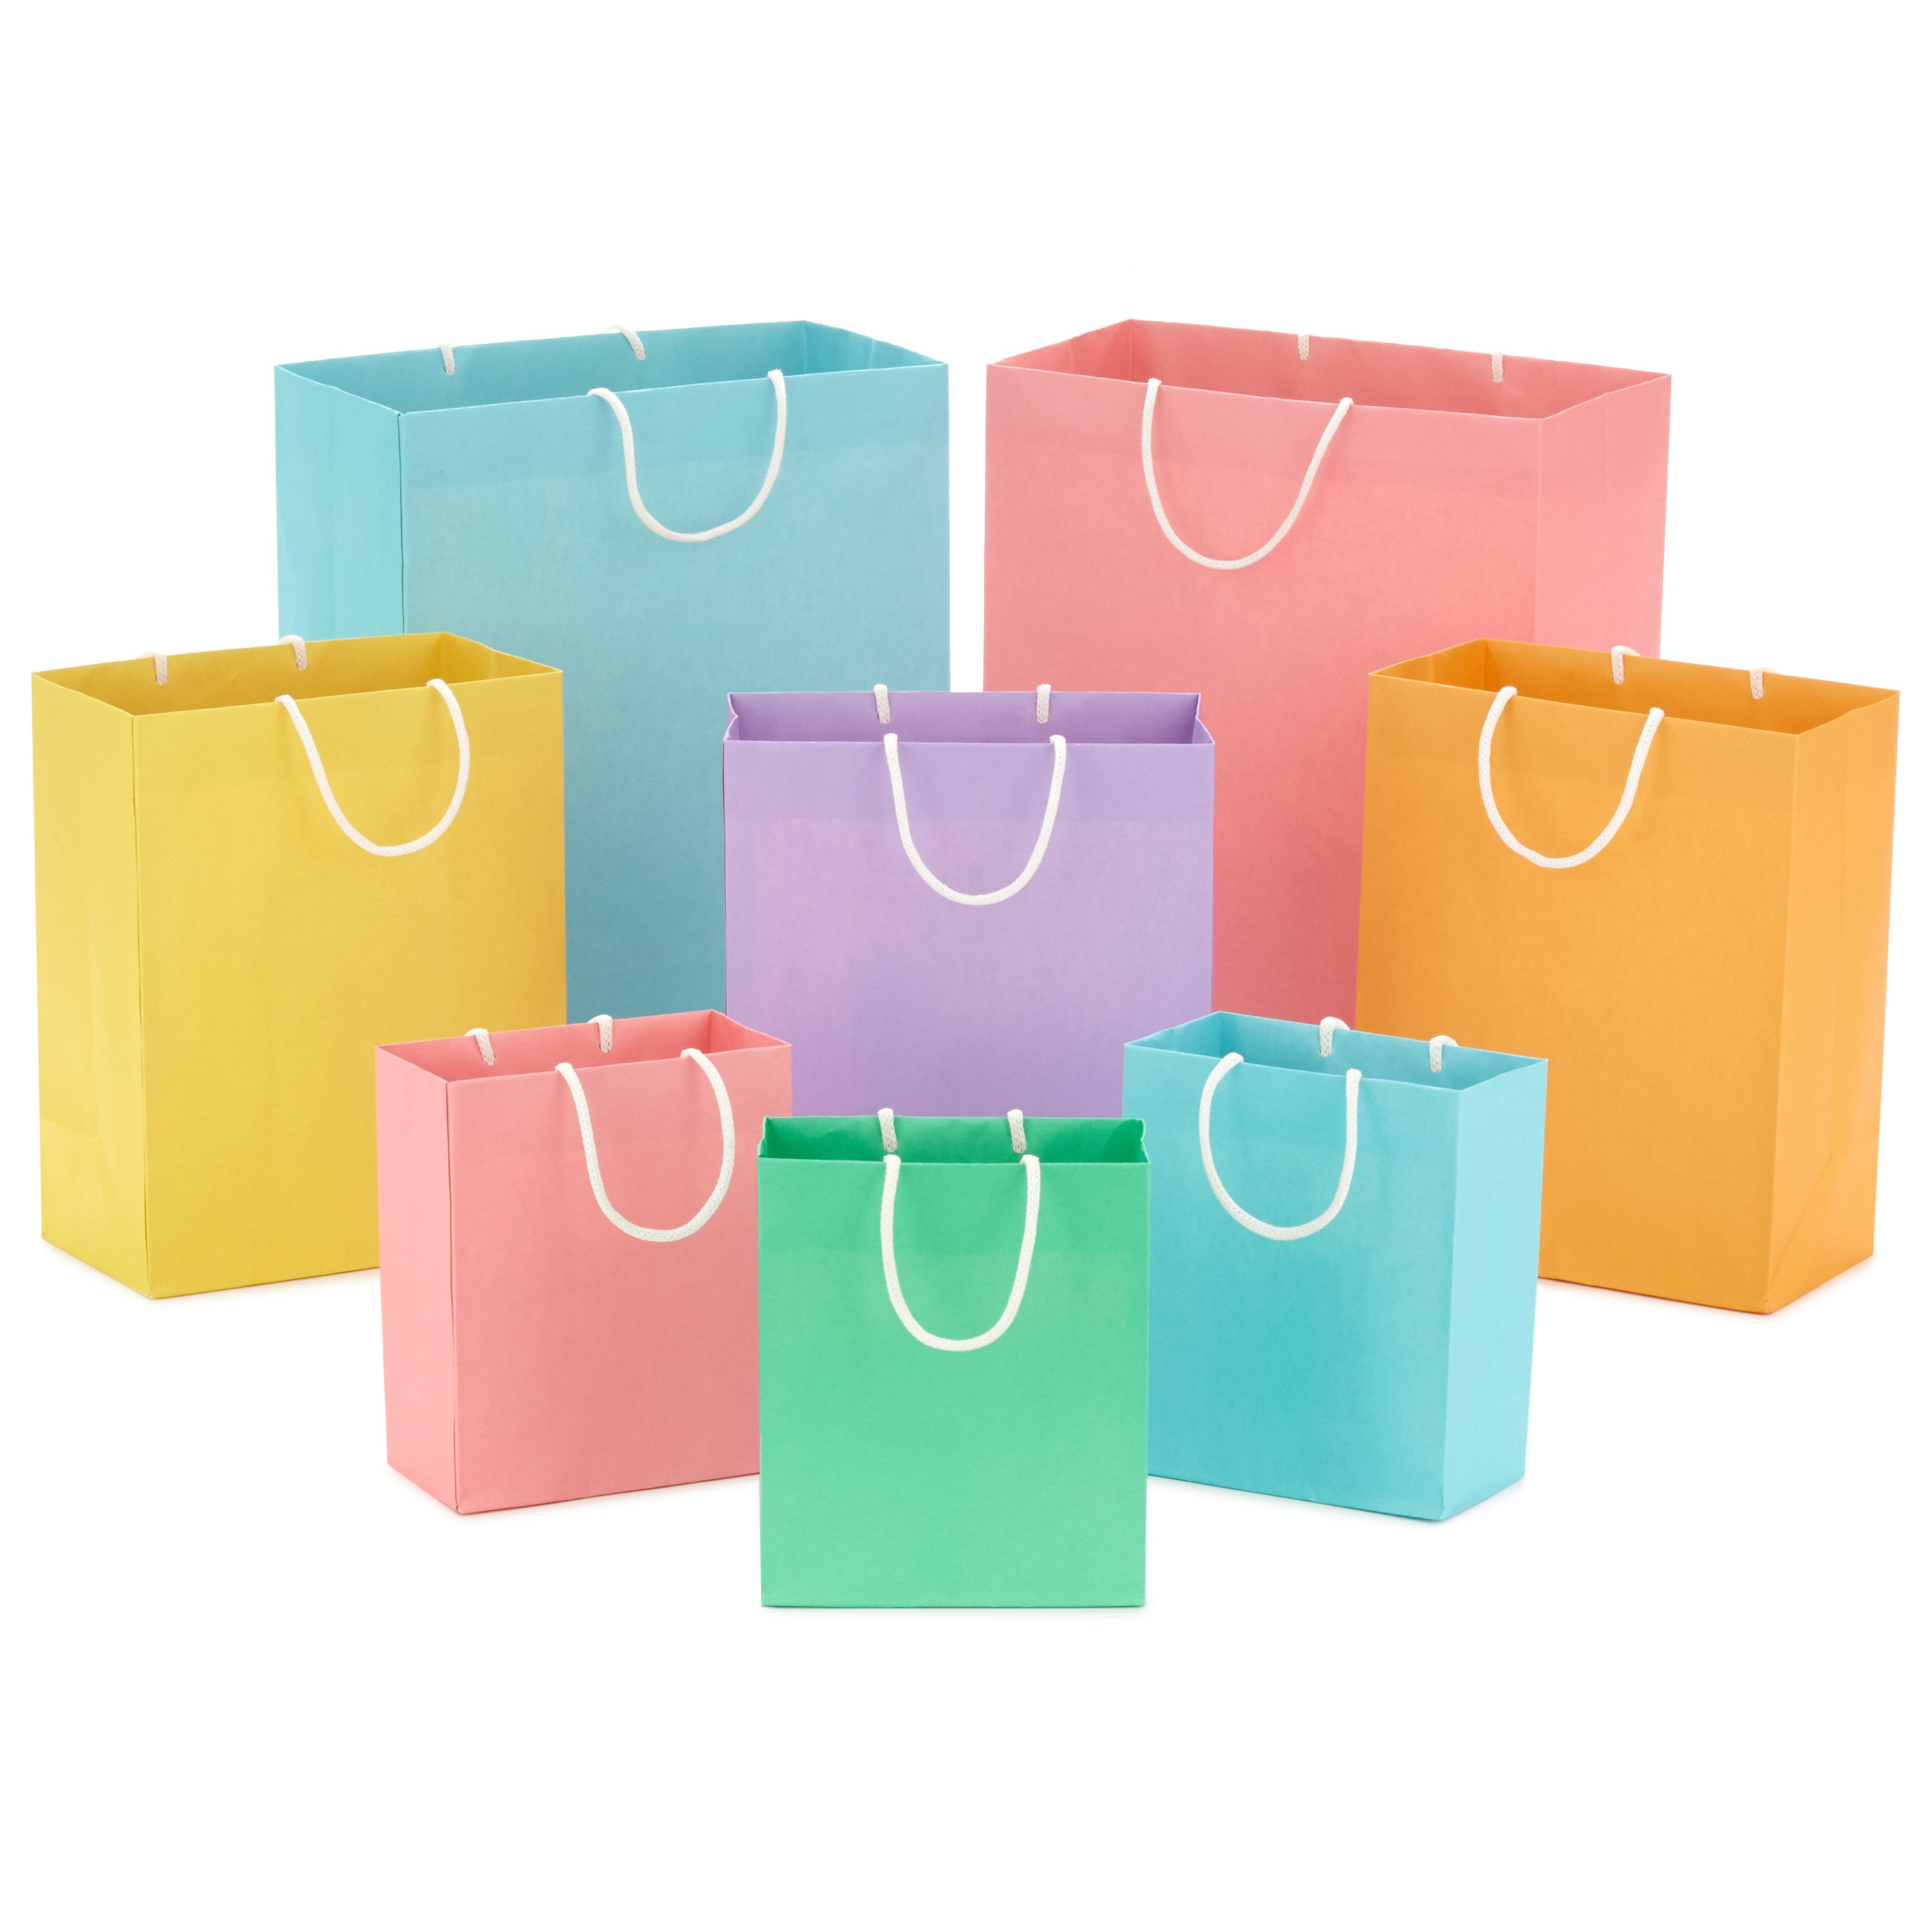 Recyclable Gift Bag Assortment (8 Bags: 3 Small 6", 3 Medium 9", 2 Large 13") Pastel Blue, Pink, Yellow, Purple, Orange, Green for Birthdays, Easter, Baby Gifts, Bridal Showers